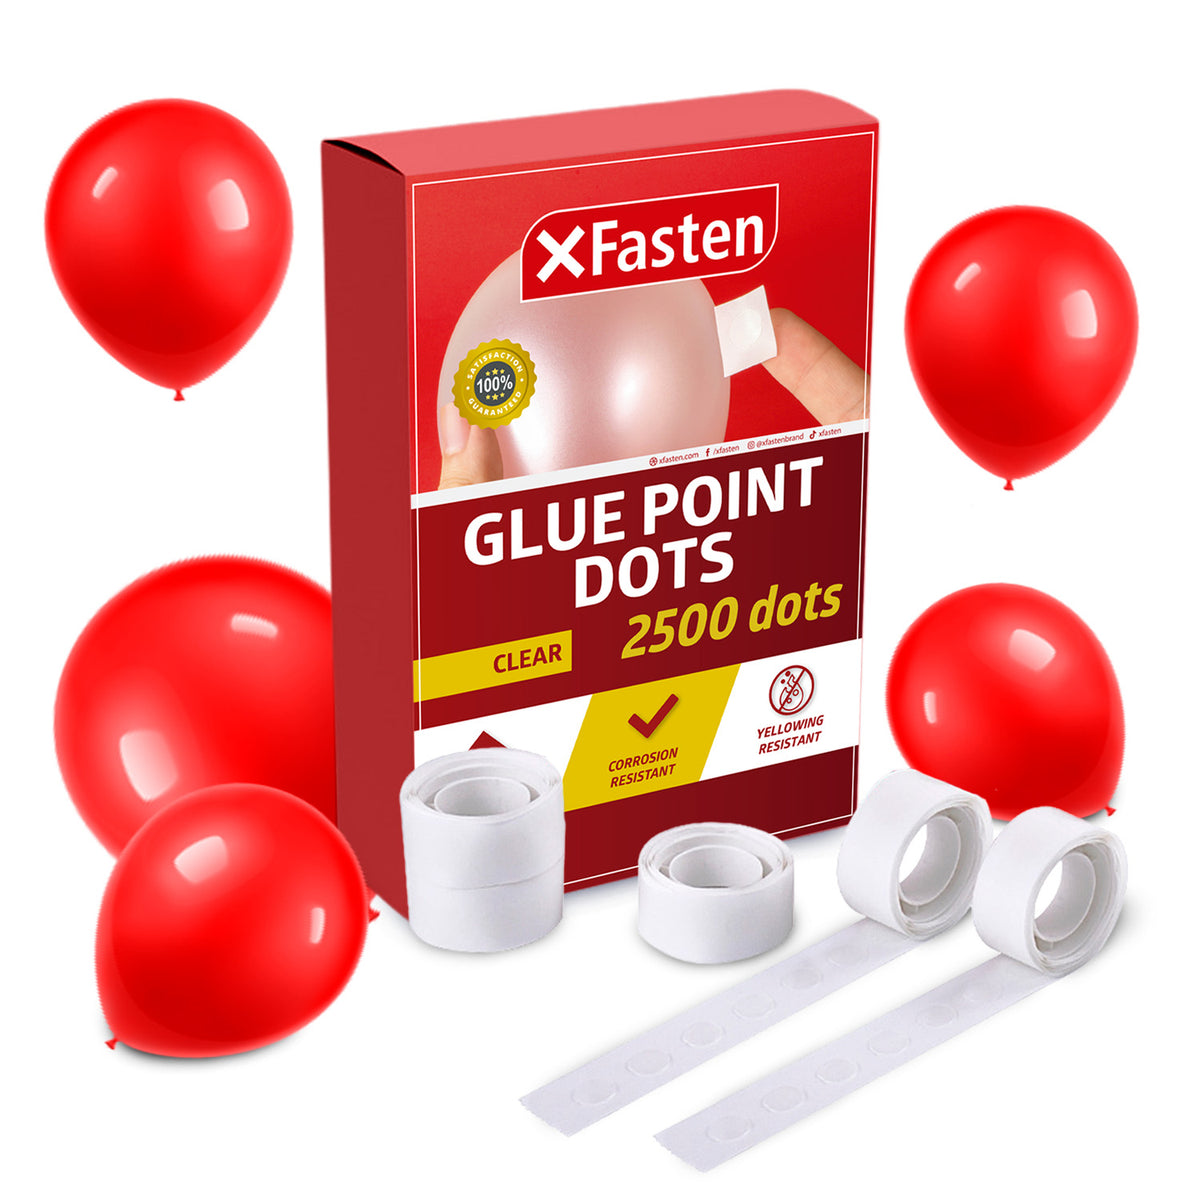 100 Points Removable Balloon Glue Dots 